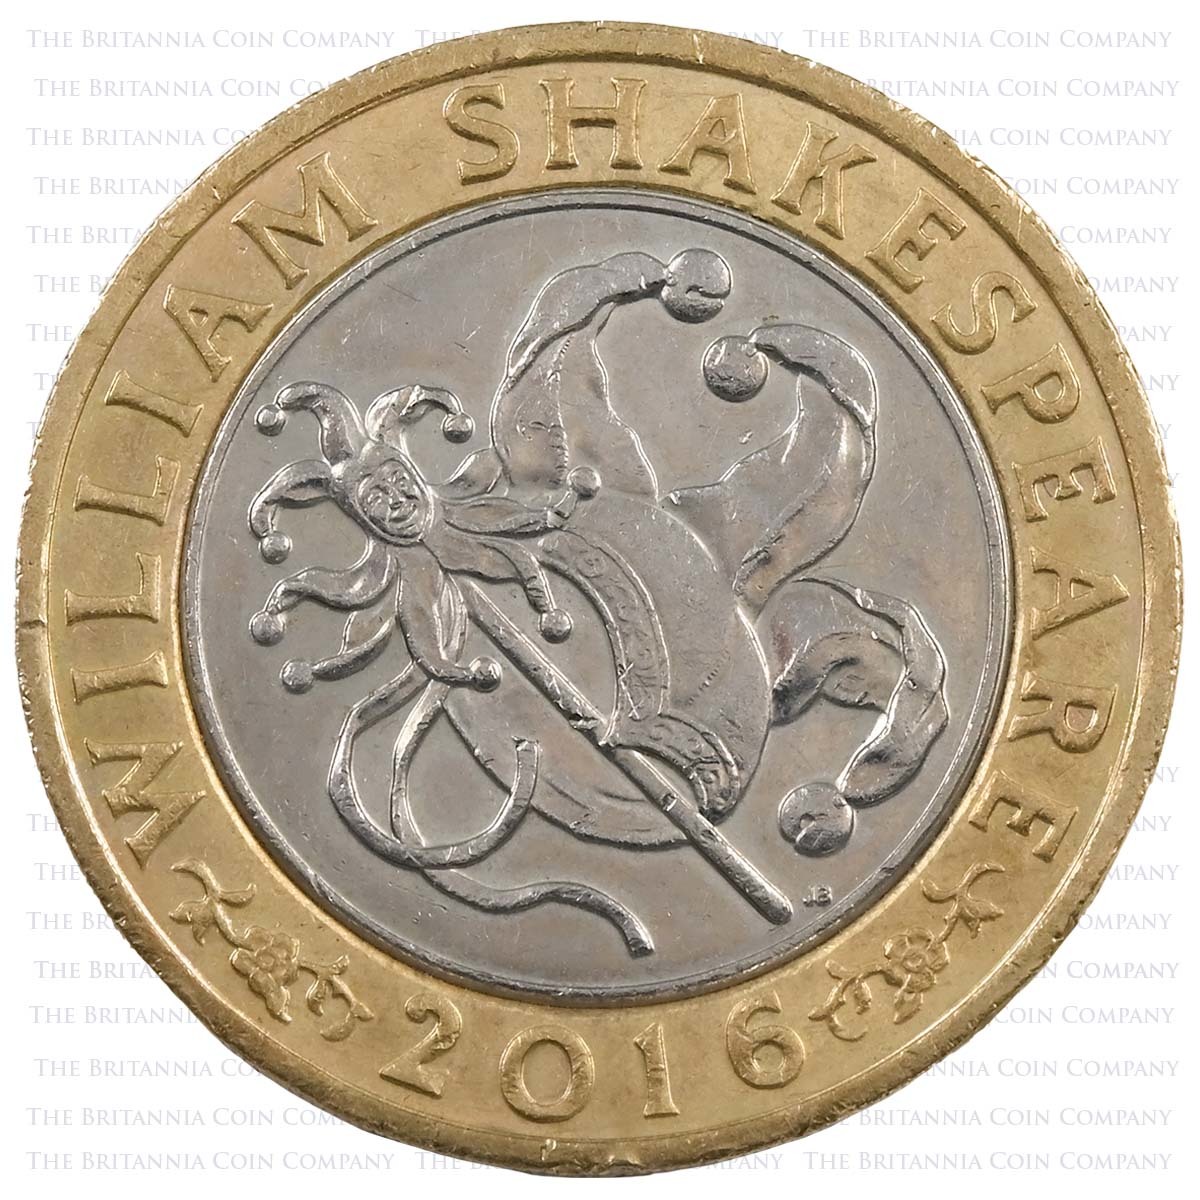 2016 William Shakespeare's Comedies Circulated Two Pound Coin Reverse